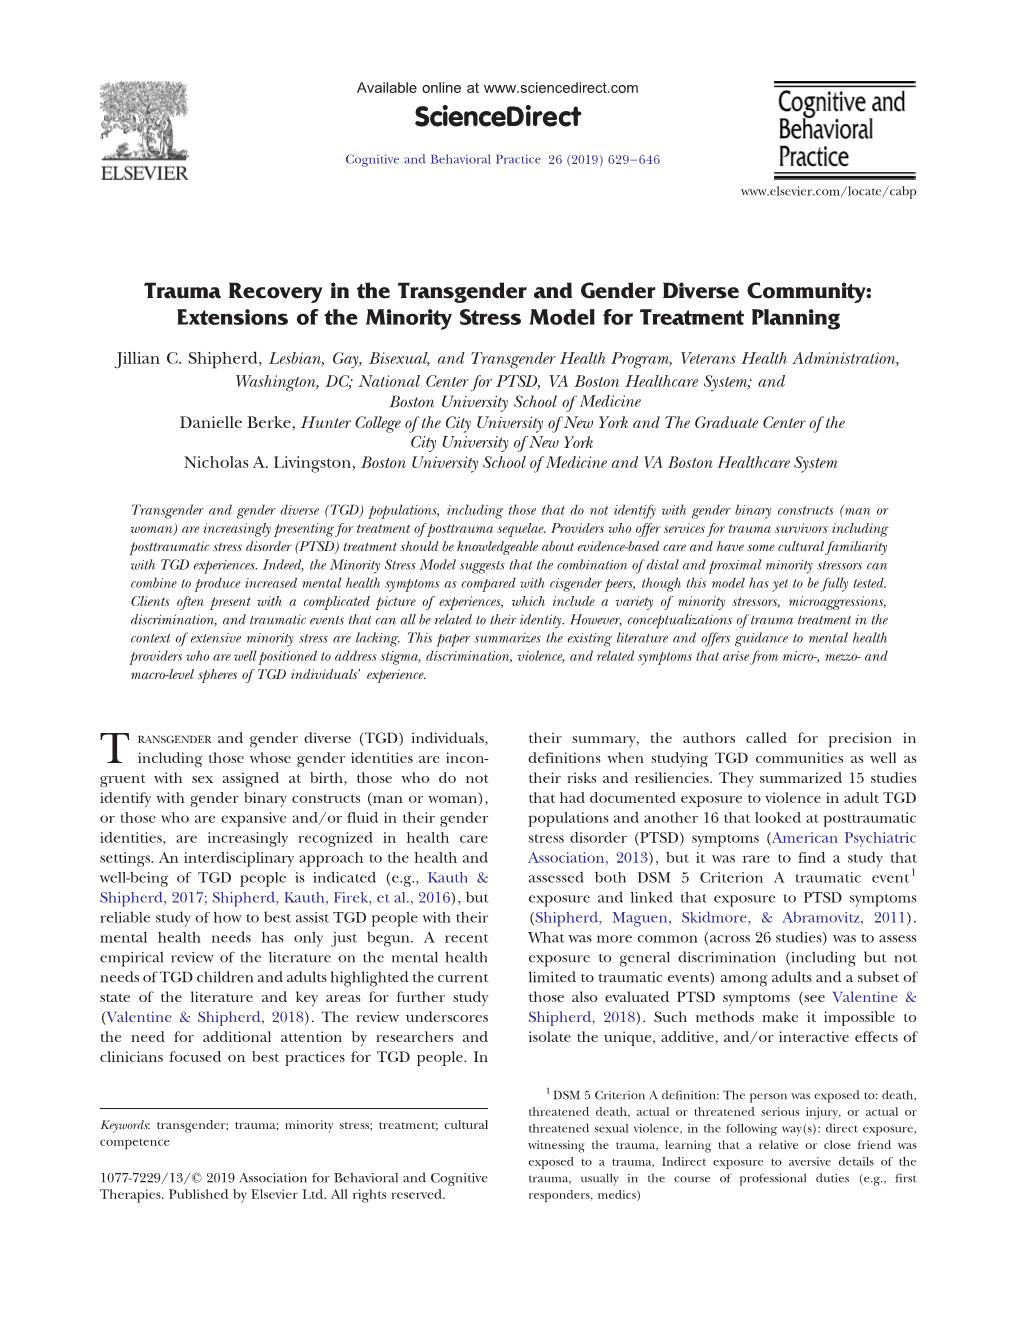 Trauma Recovery in the Transgender and Gender Diverse Community: Extensions of the Minority Stress Model for Treatment Planning